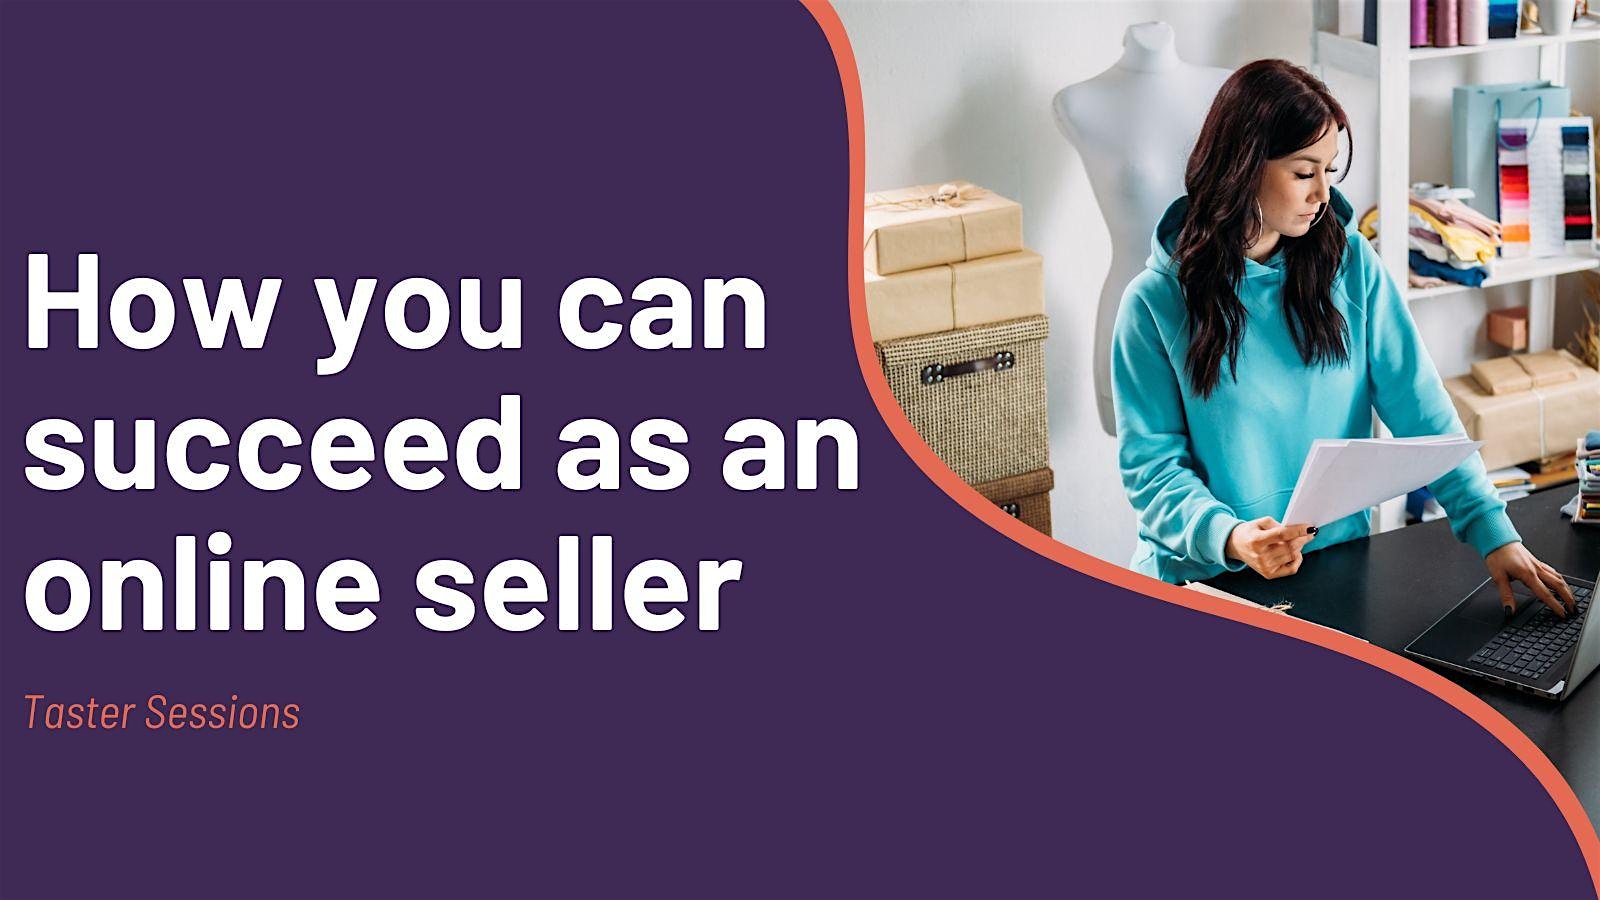 Taster Sessions: How you can succeed as an online seller (Stranraer) image